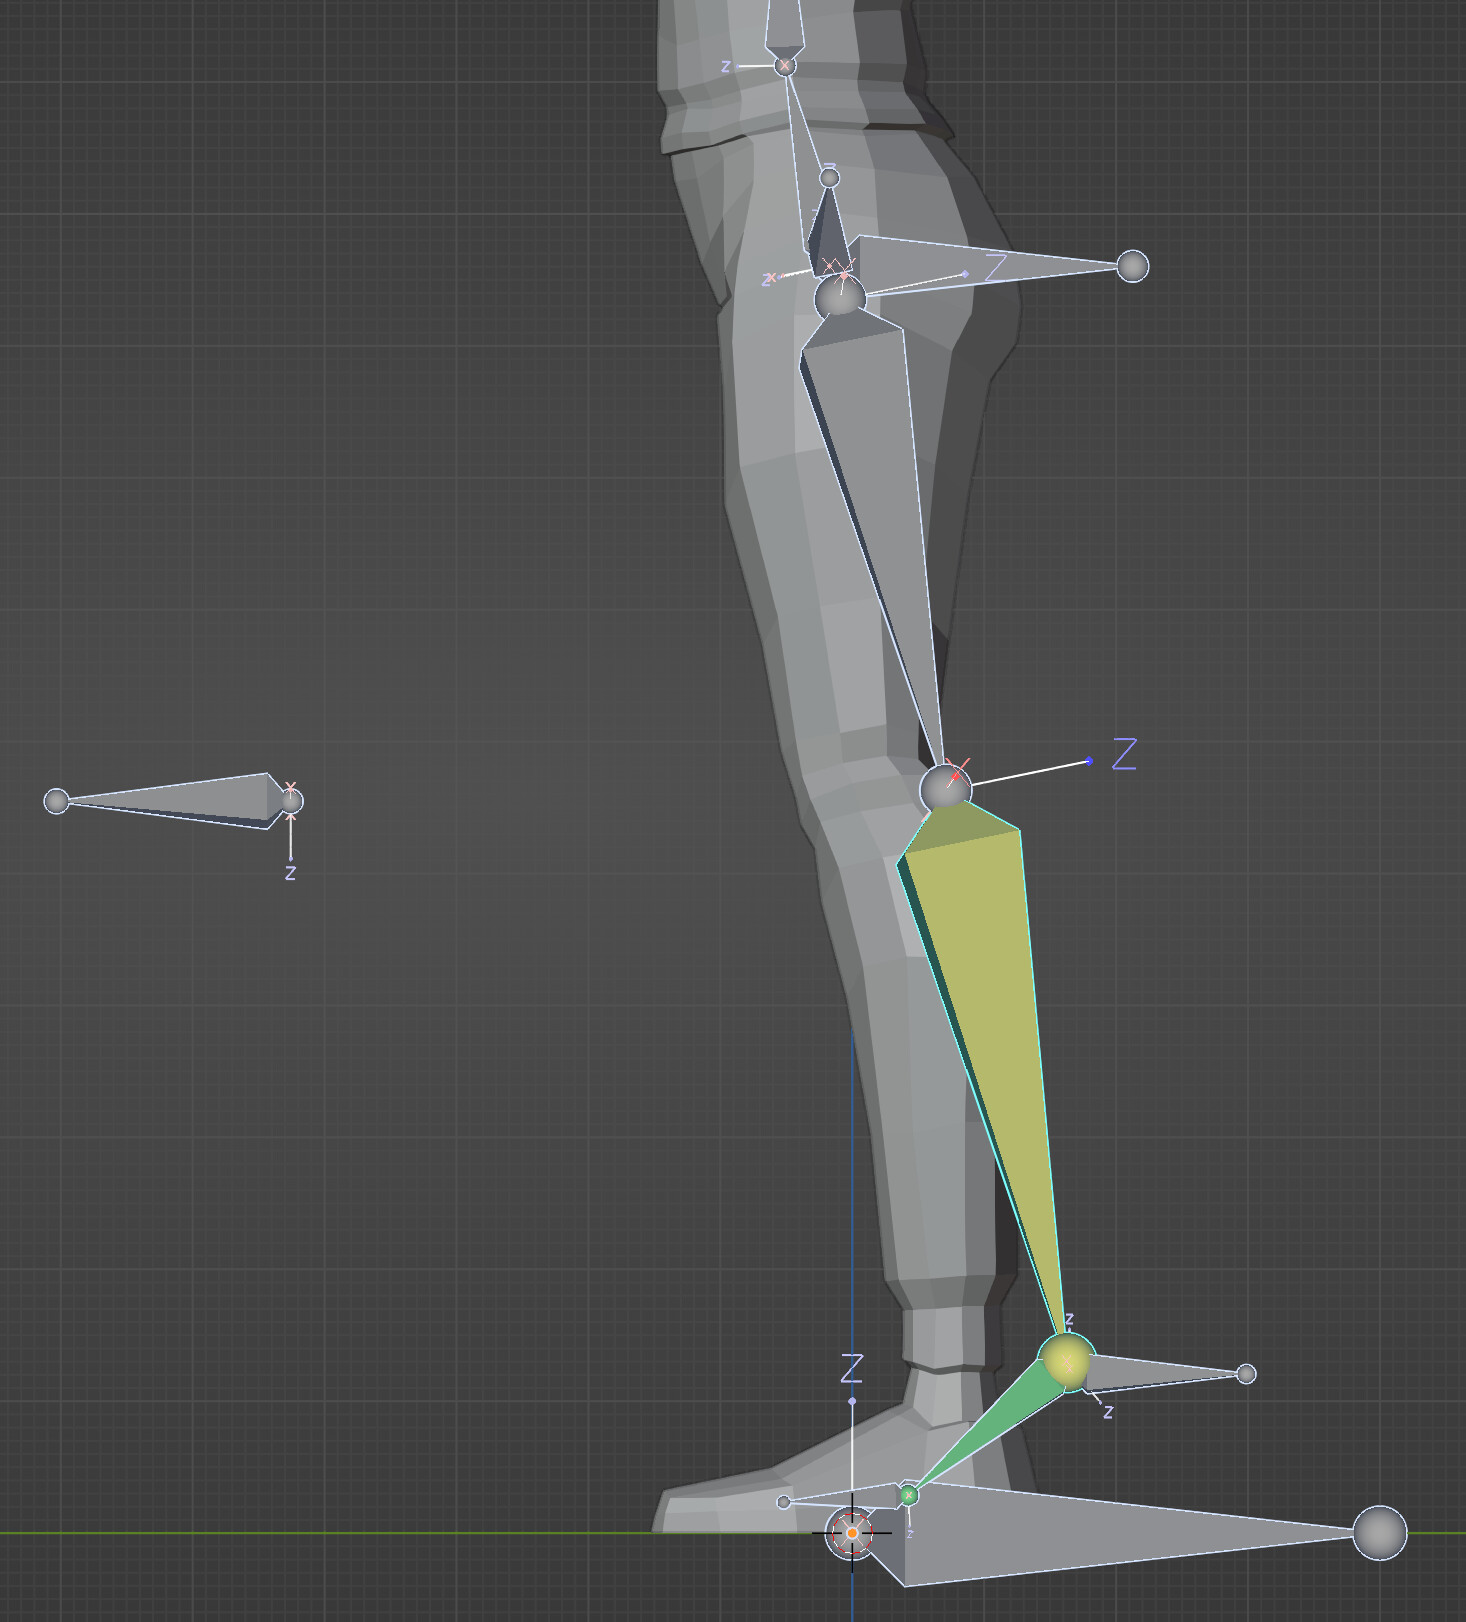 When ever I enter edit mode, the bones move really far behind the model.  Why? I rigged it with an auto rigger(accuRIG) cause I'm not doing allat. :  r/blender